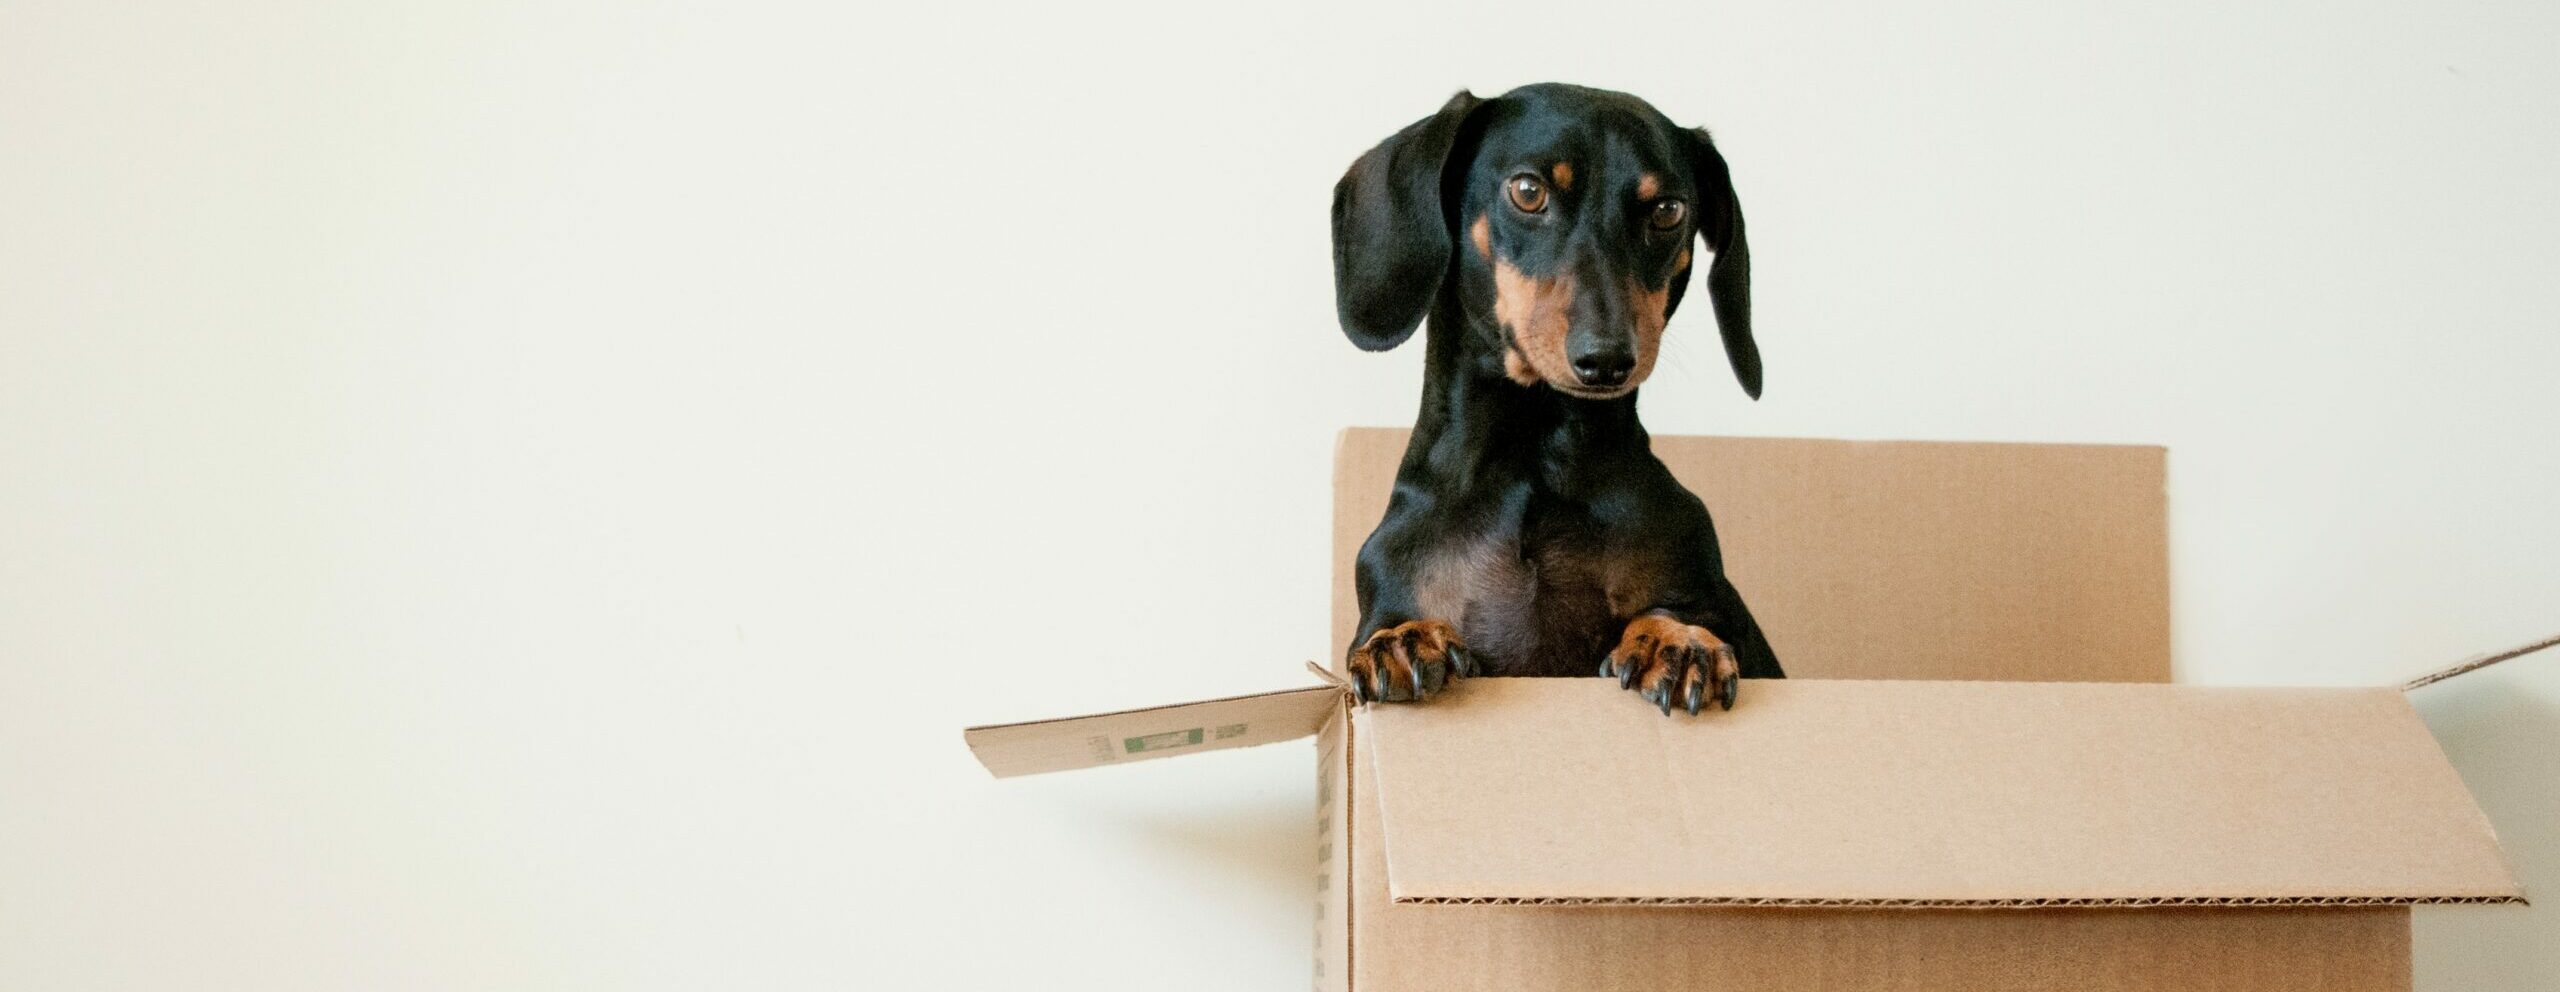 dog in moving box